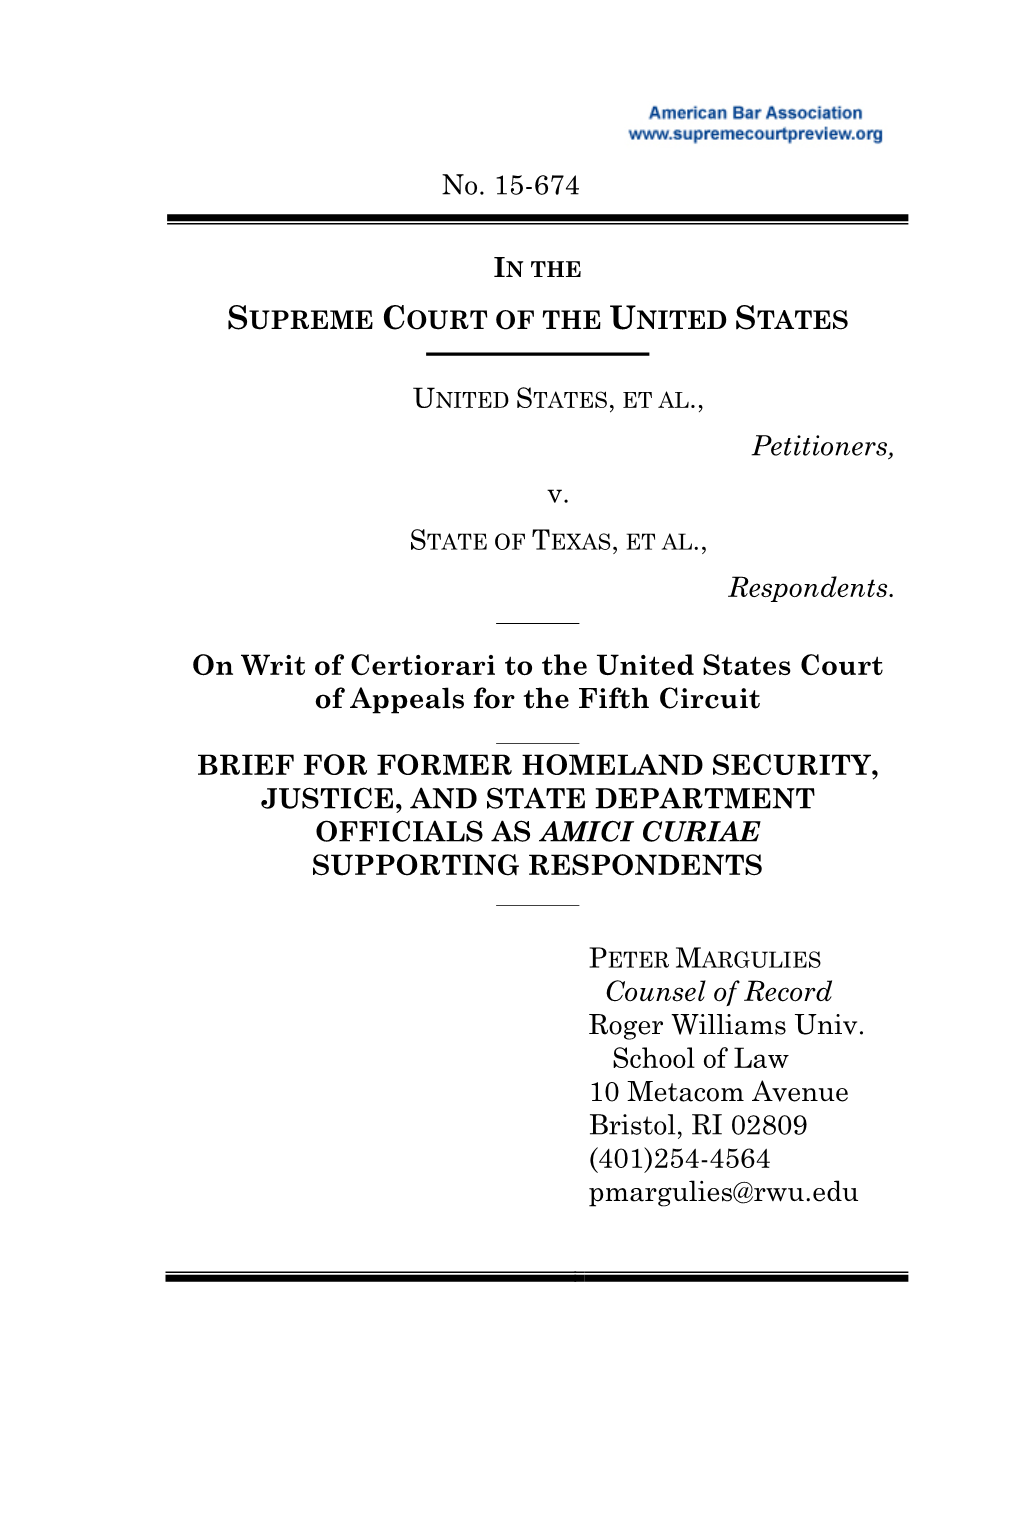 Amicus Brief for Former Homeland Security